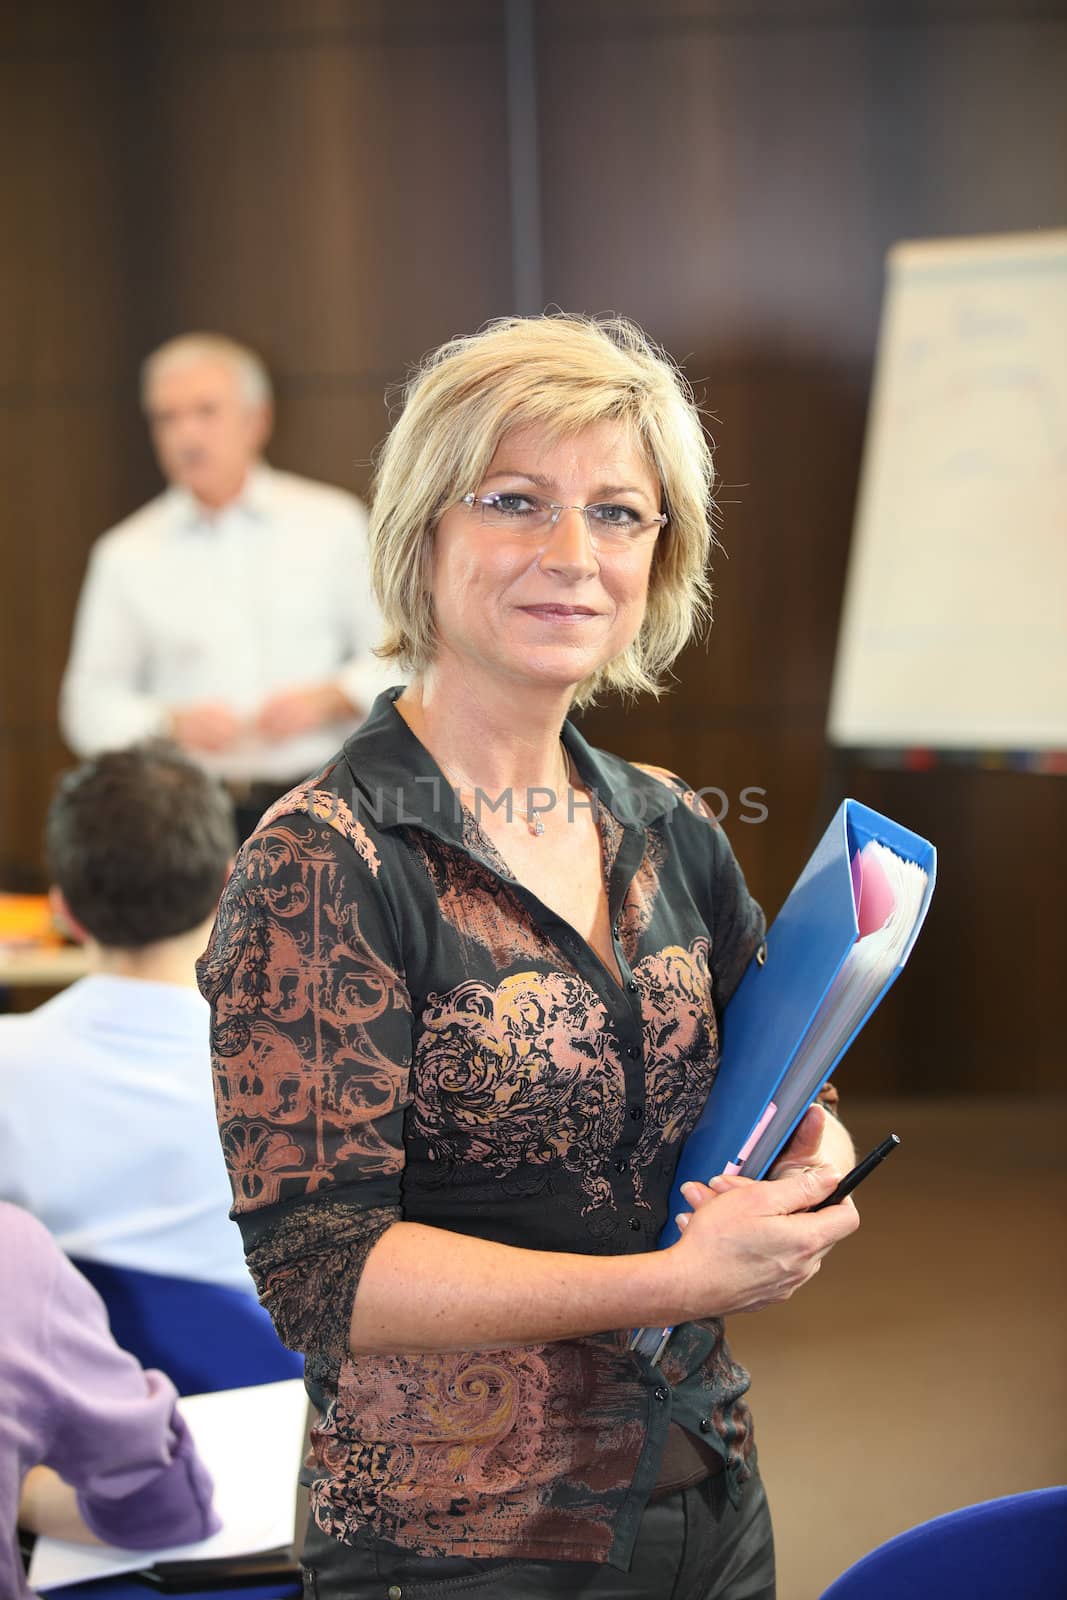 Woman holding a file during a presentation by phovoir